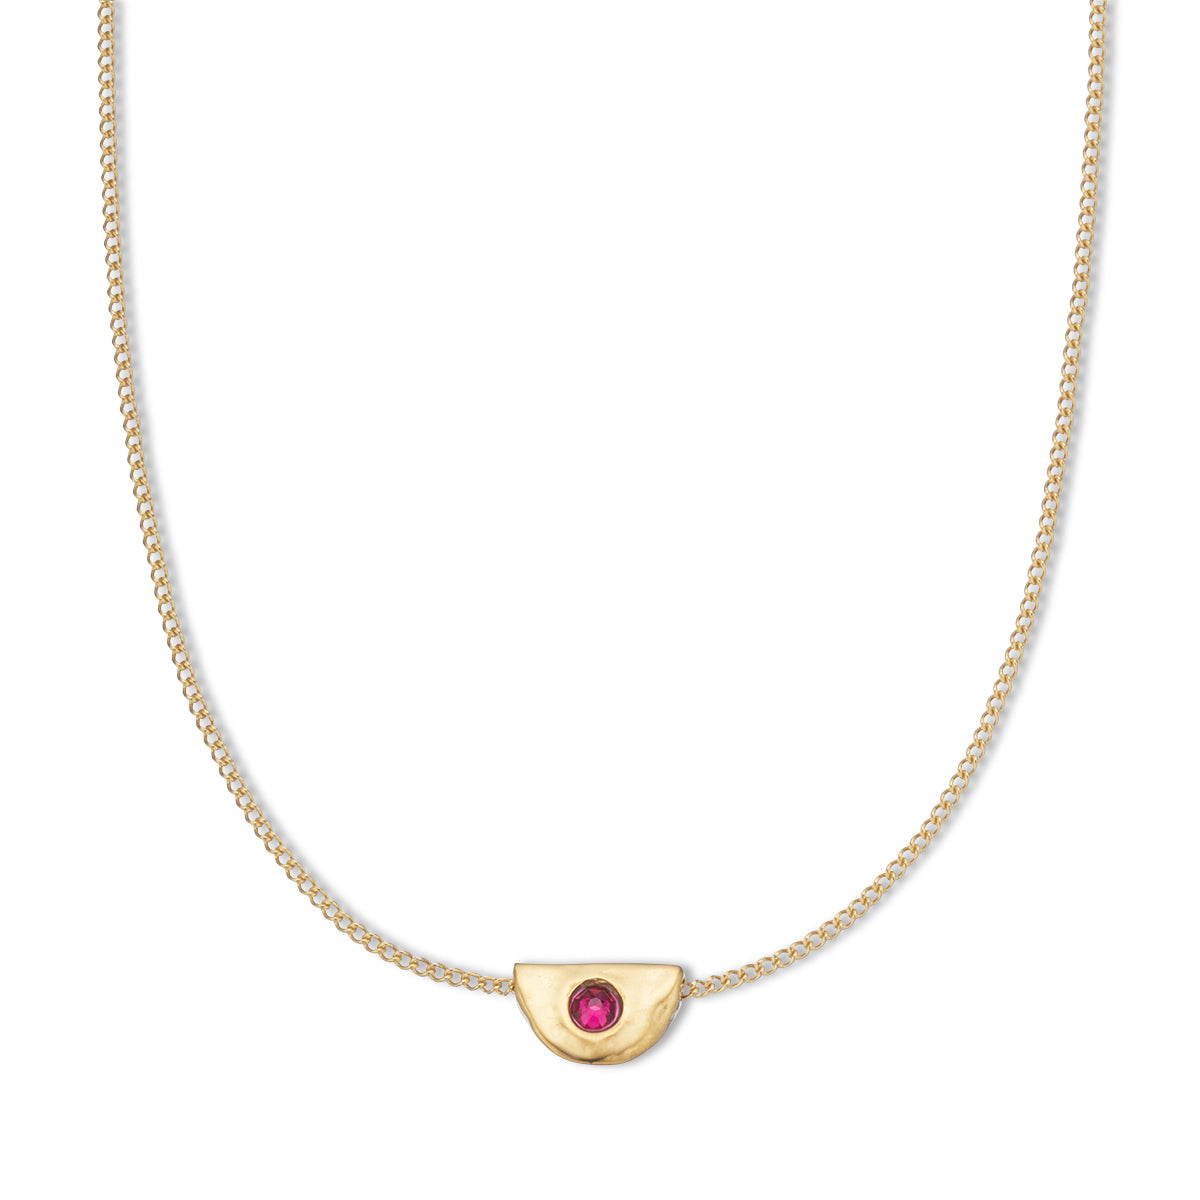 July ruby birthstone necklace 18k gold plated